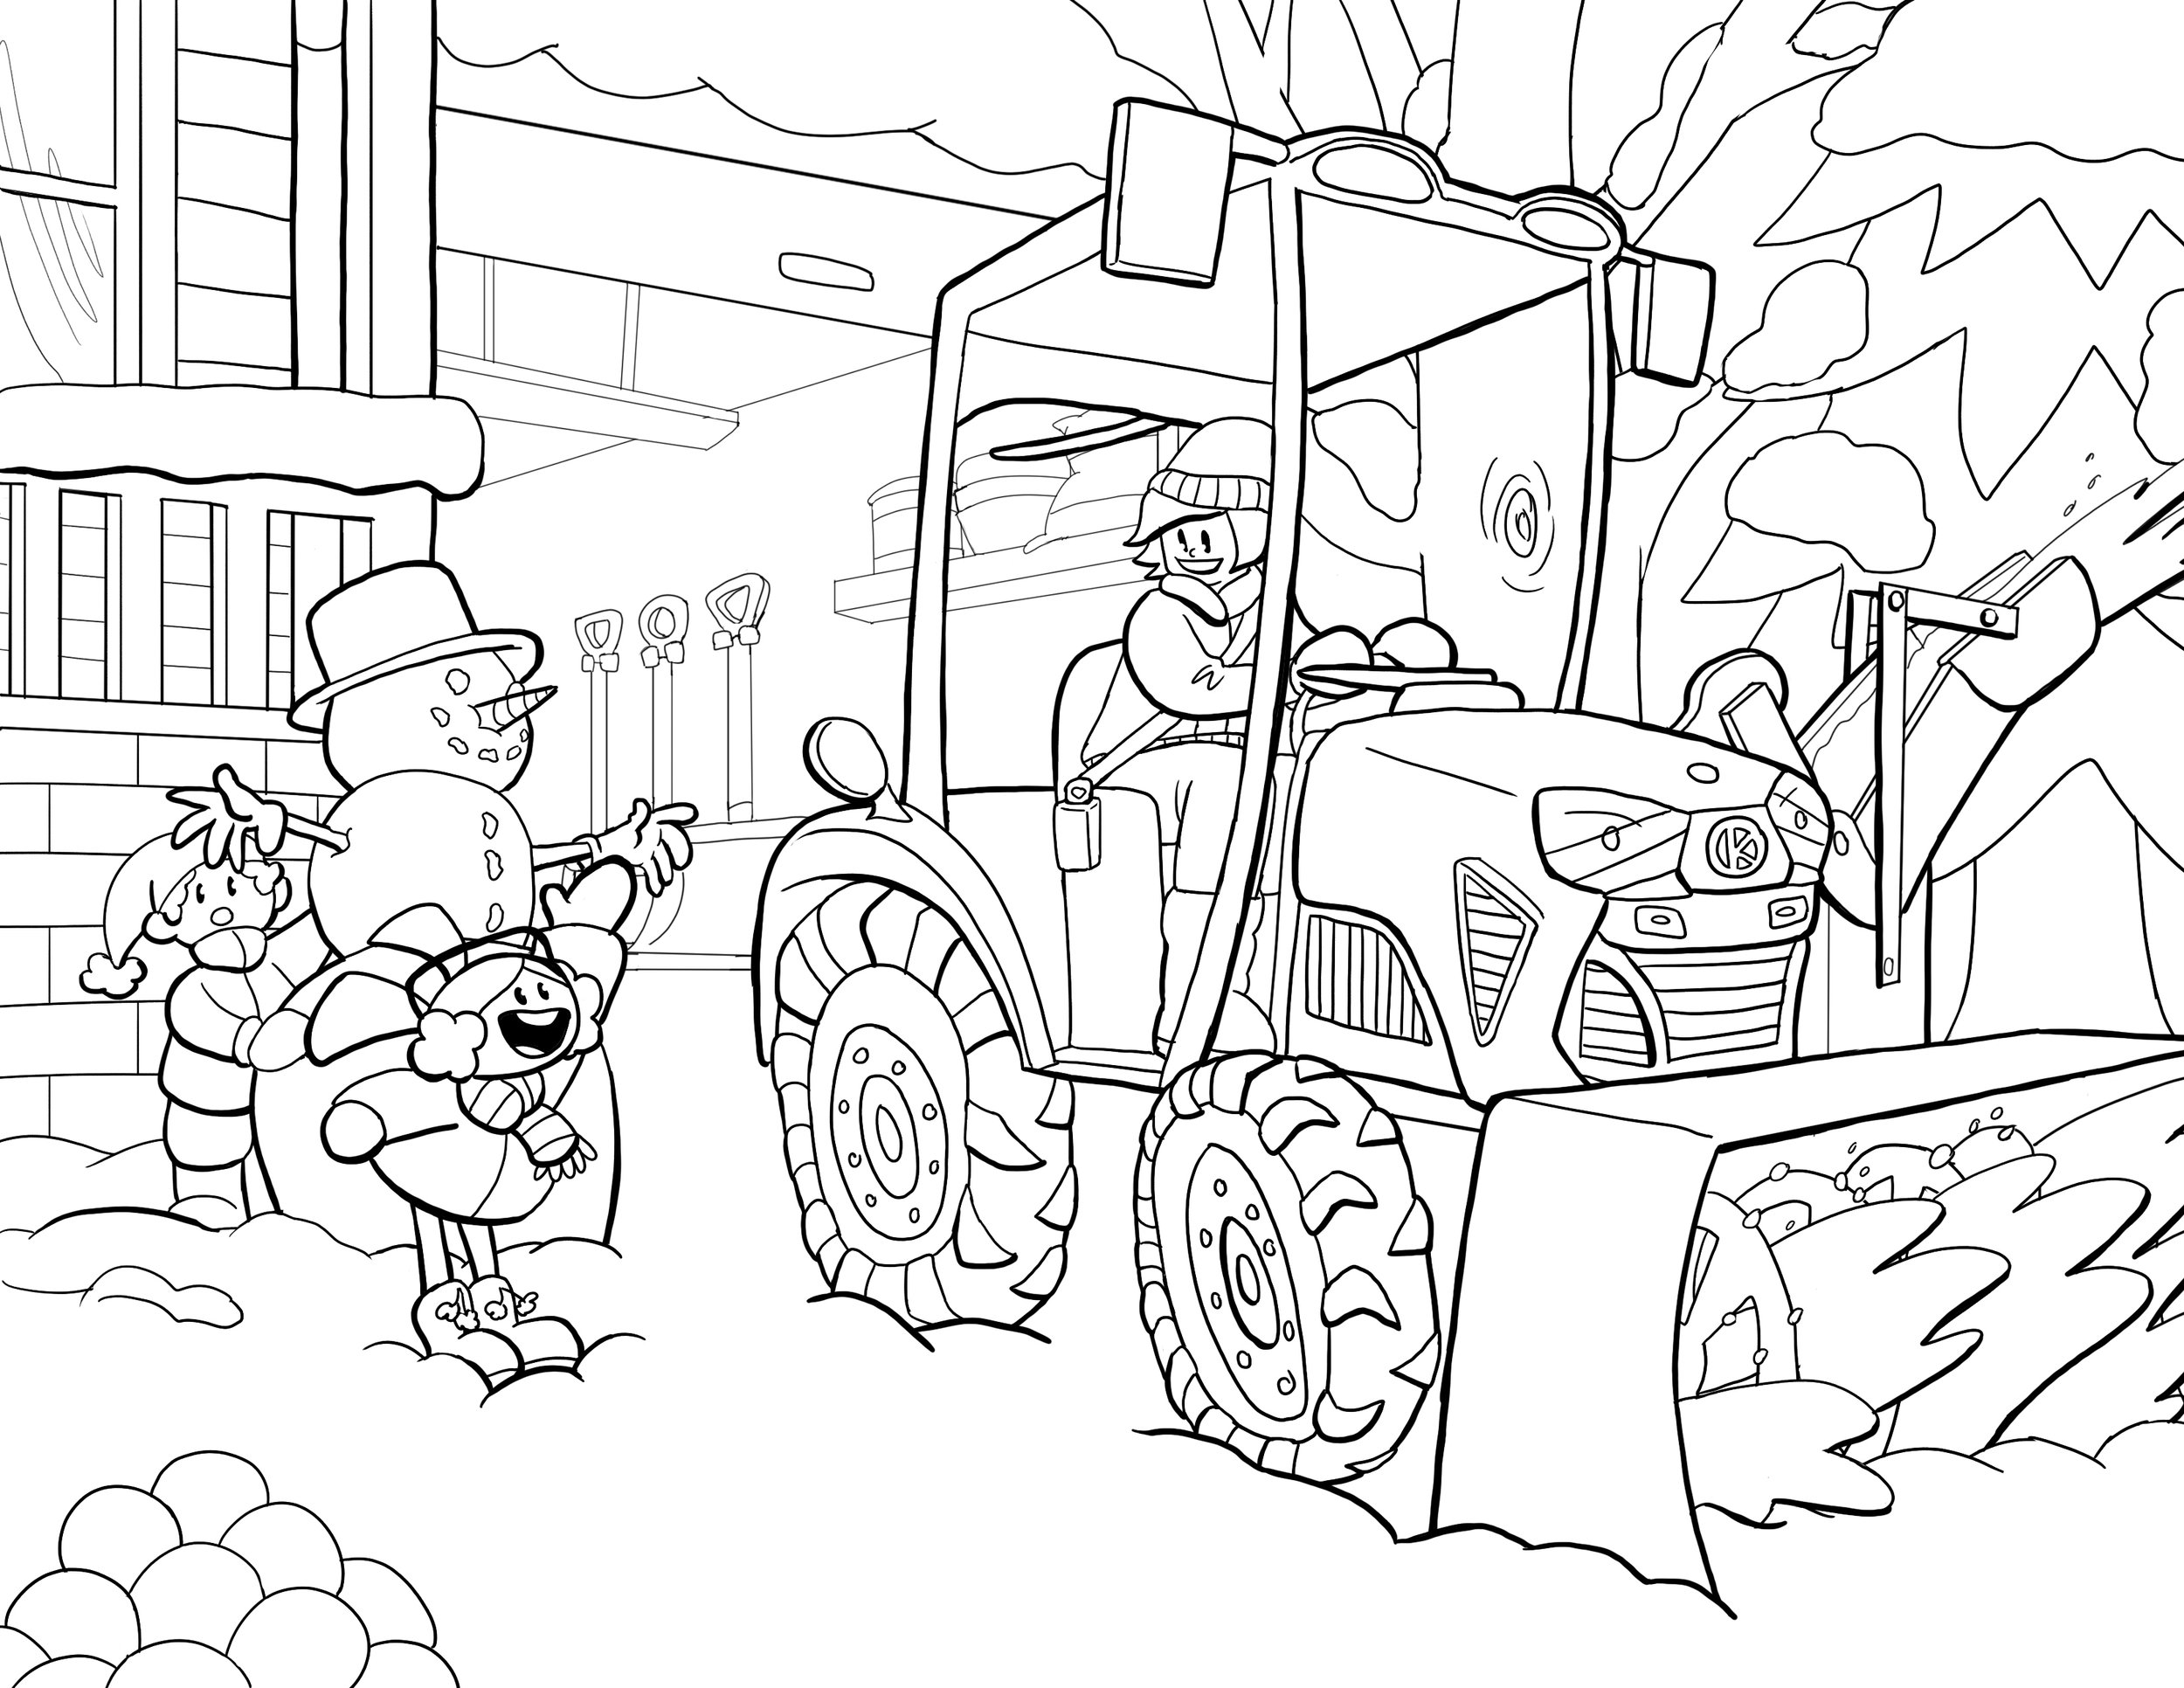 Winter Snow Coloring page V4.jpg